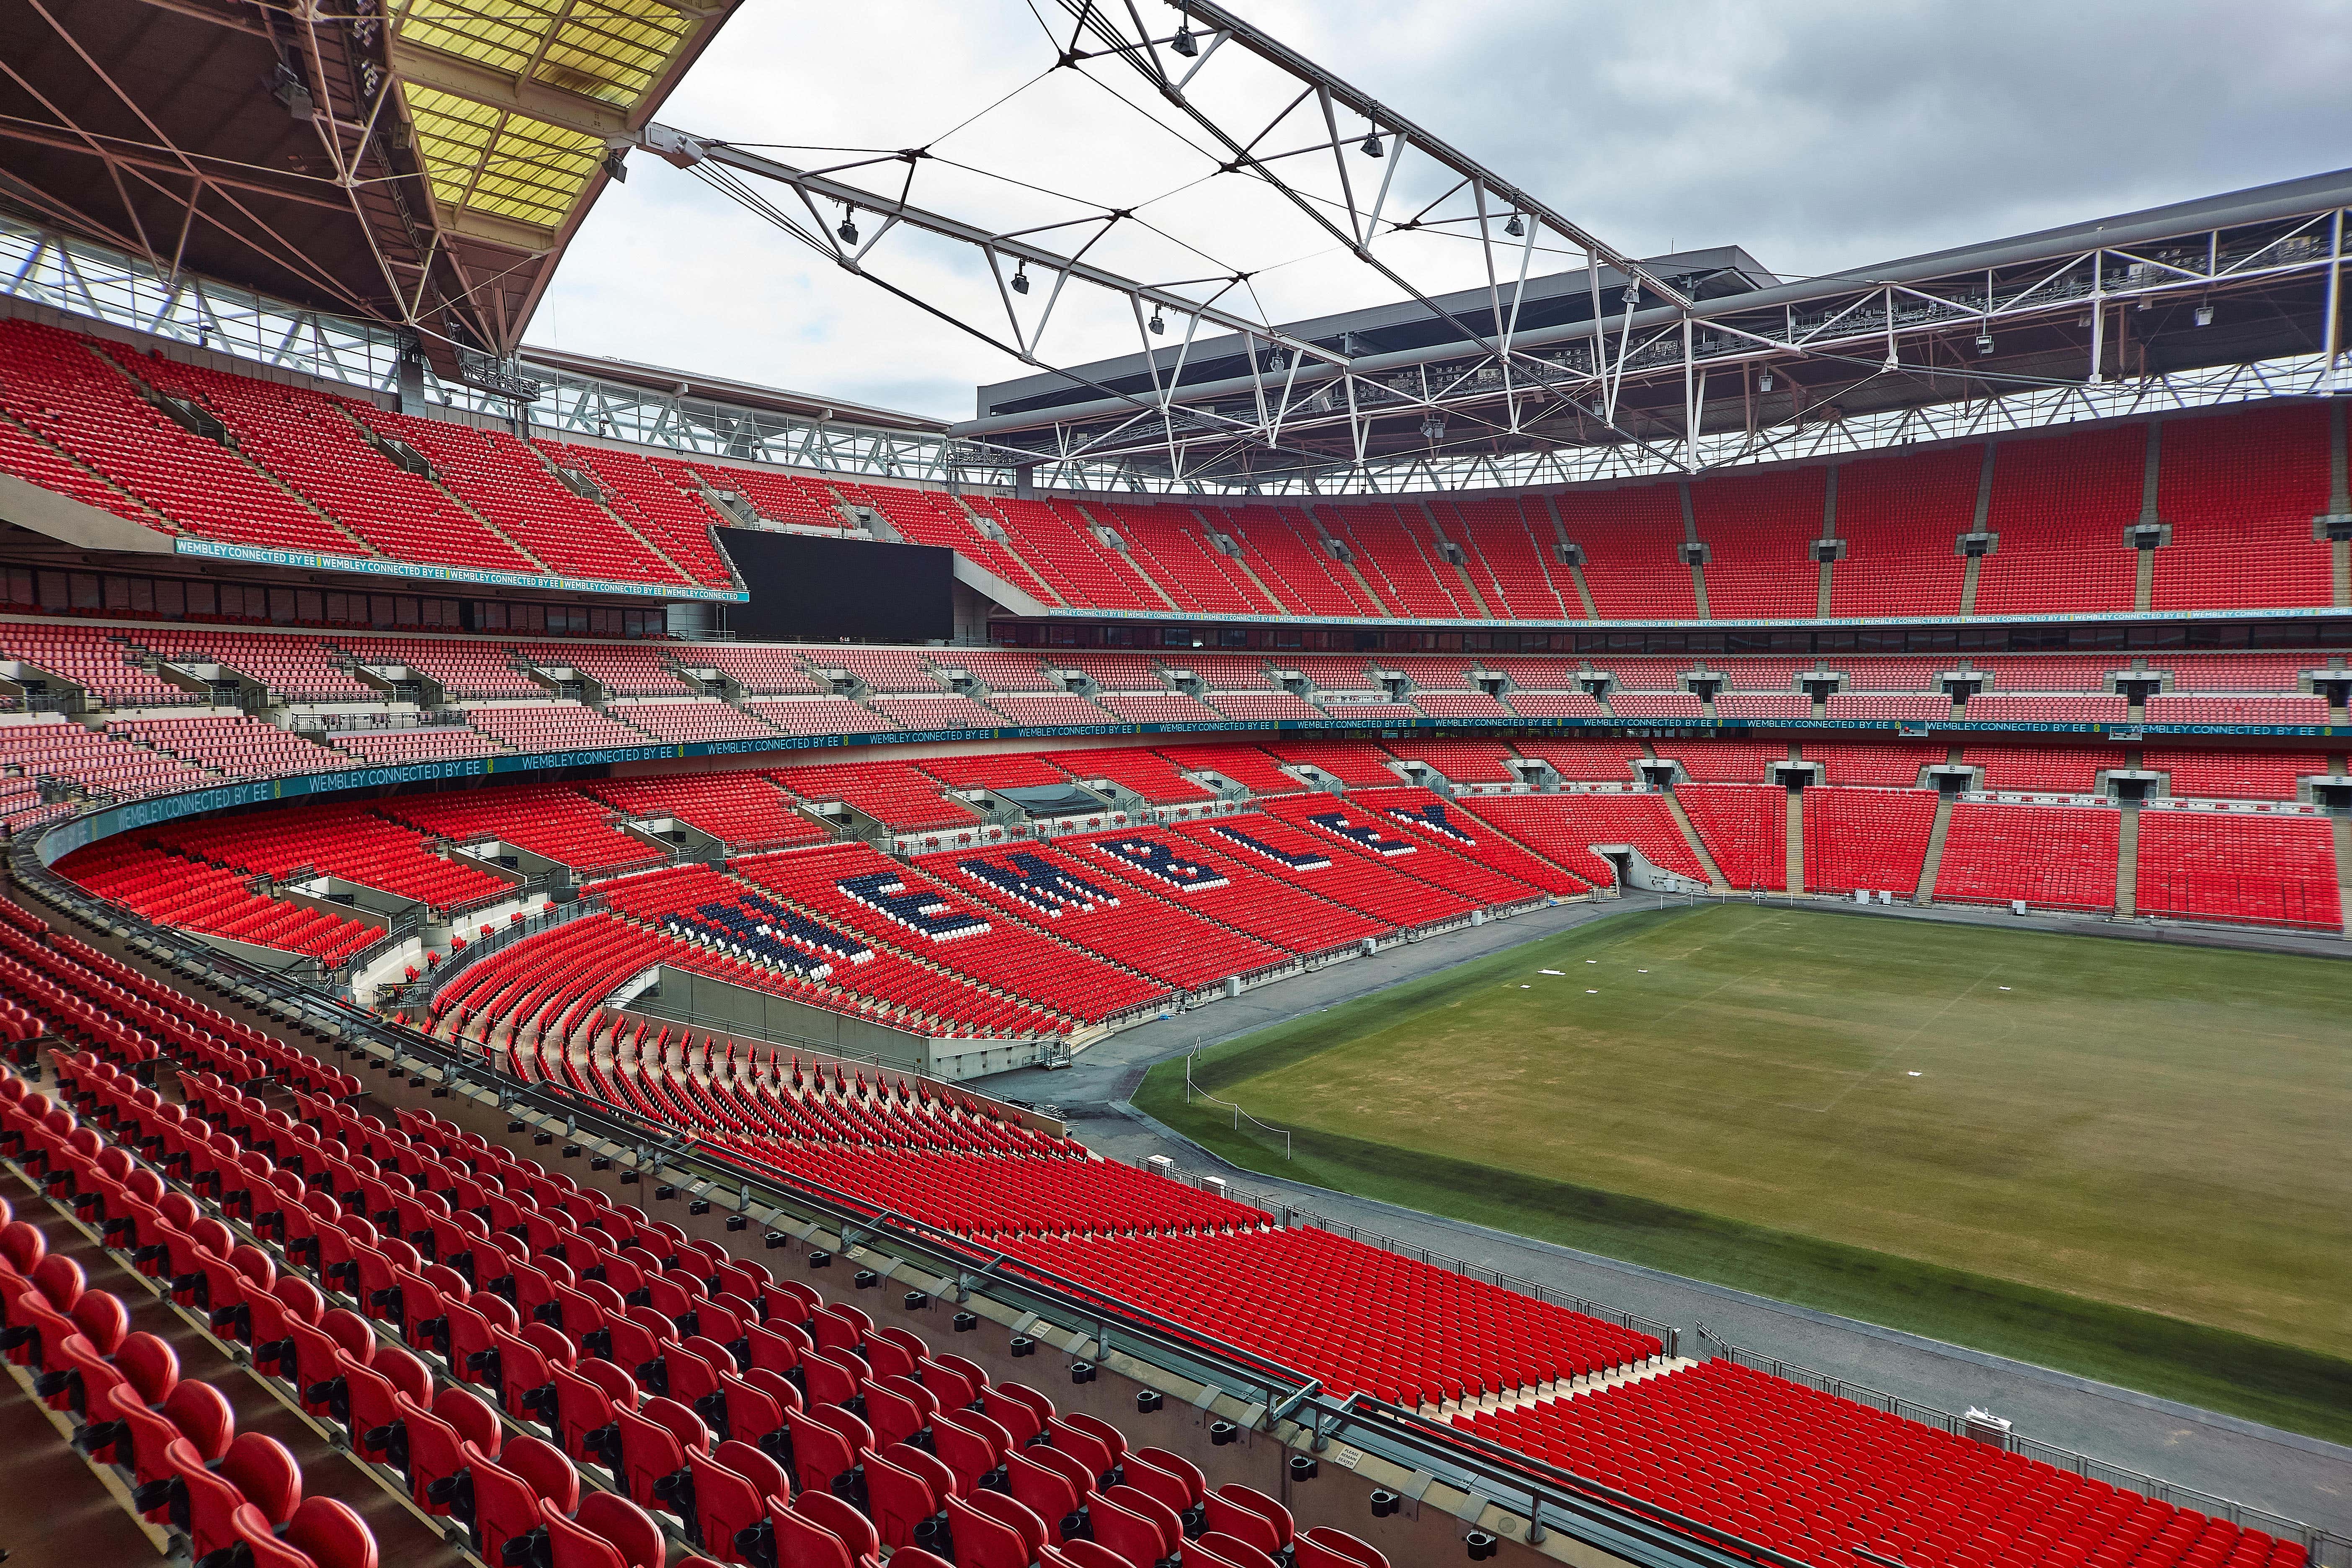 Football fans driving from Manchester to the FA Cup final are being urged to use certain routes and motorway service stations based on who they support (Andy Guest/Alamy Stock Photo/PA)